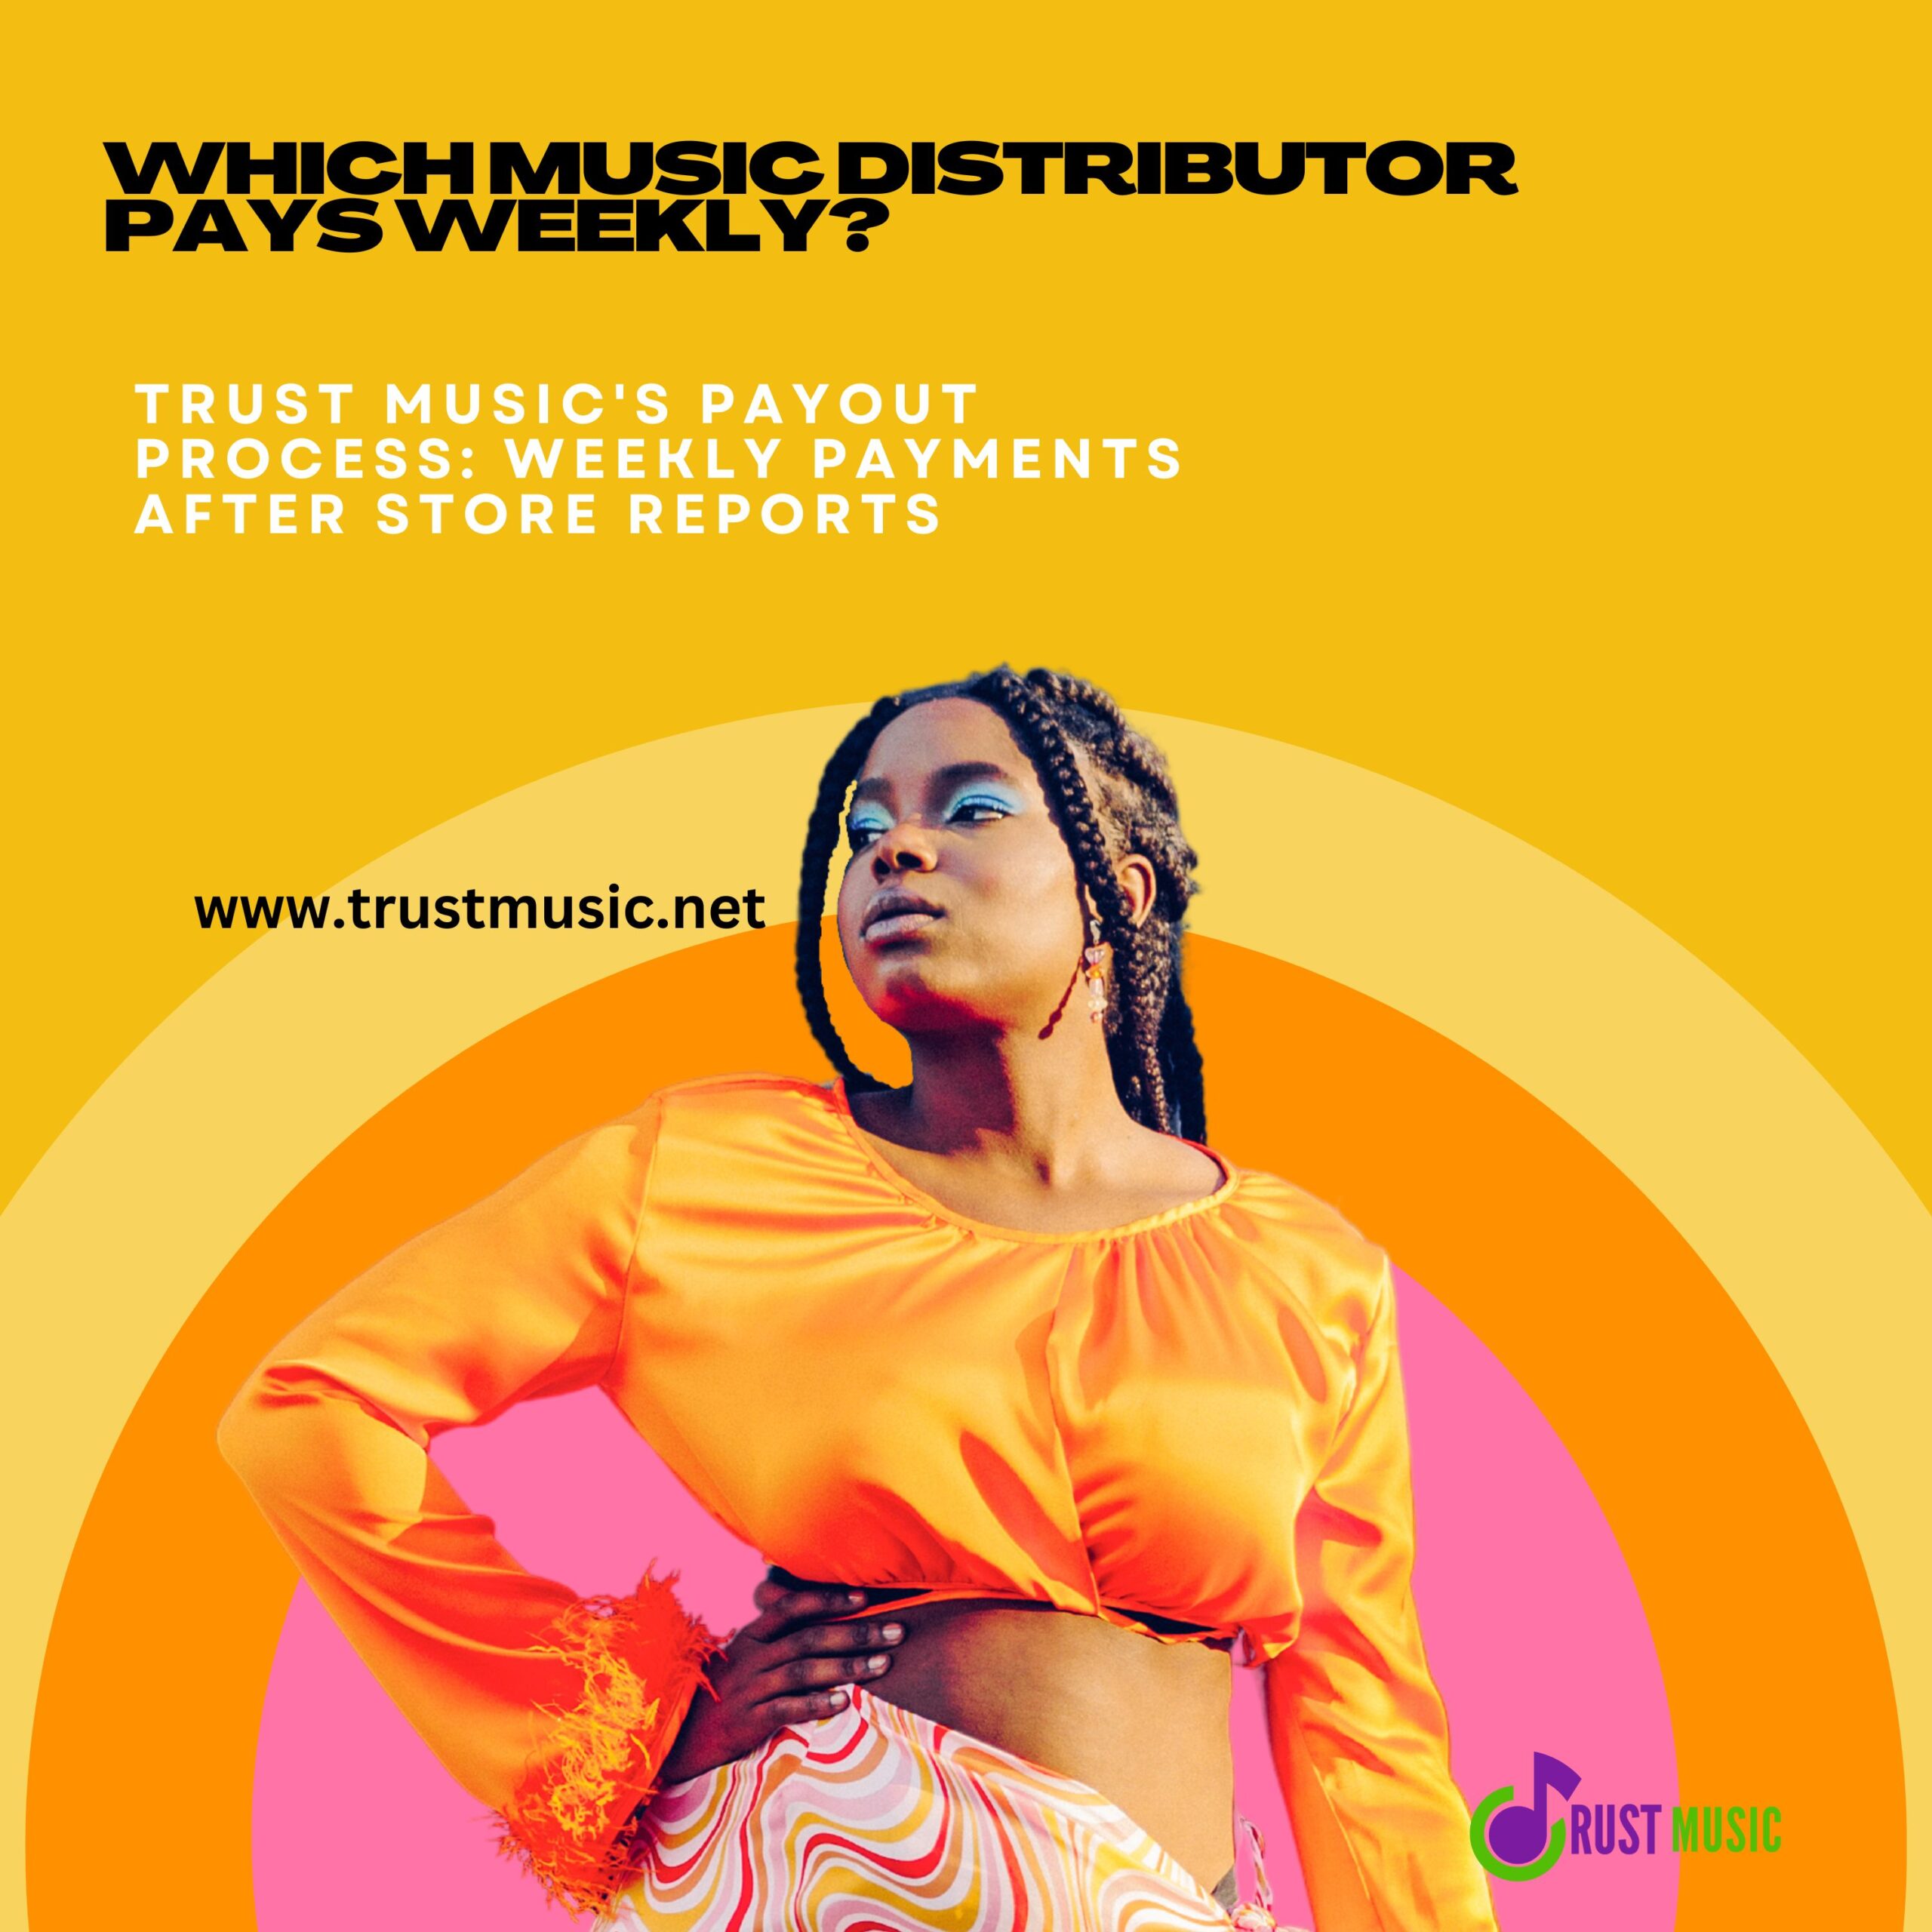 Which Music Distributor Pays Weekly? Trust Music is number 1 in weekly payout